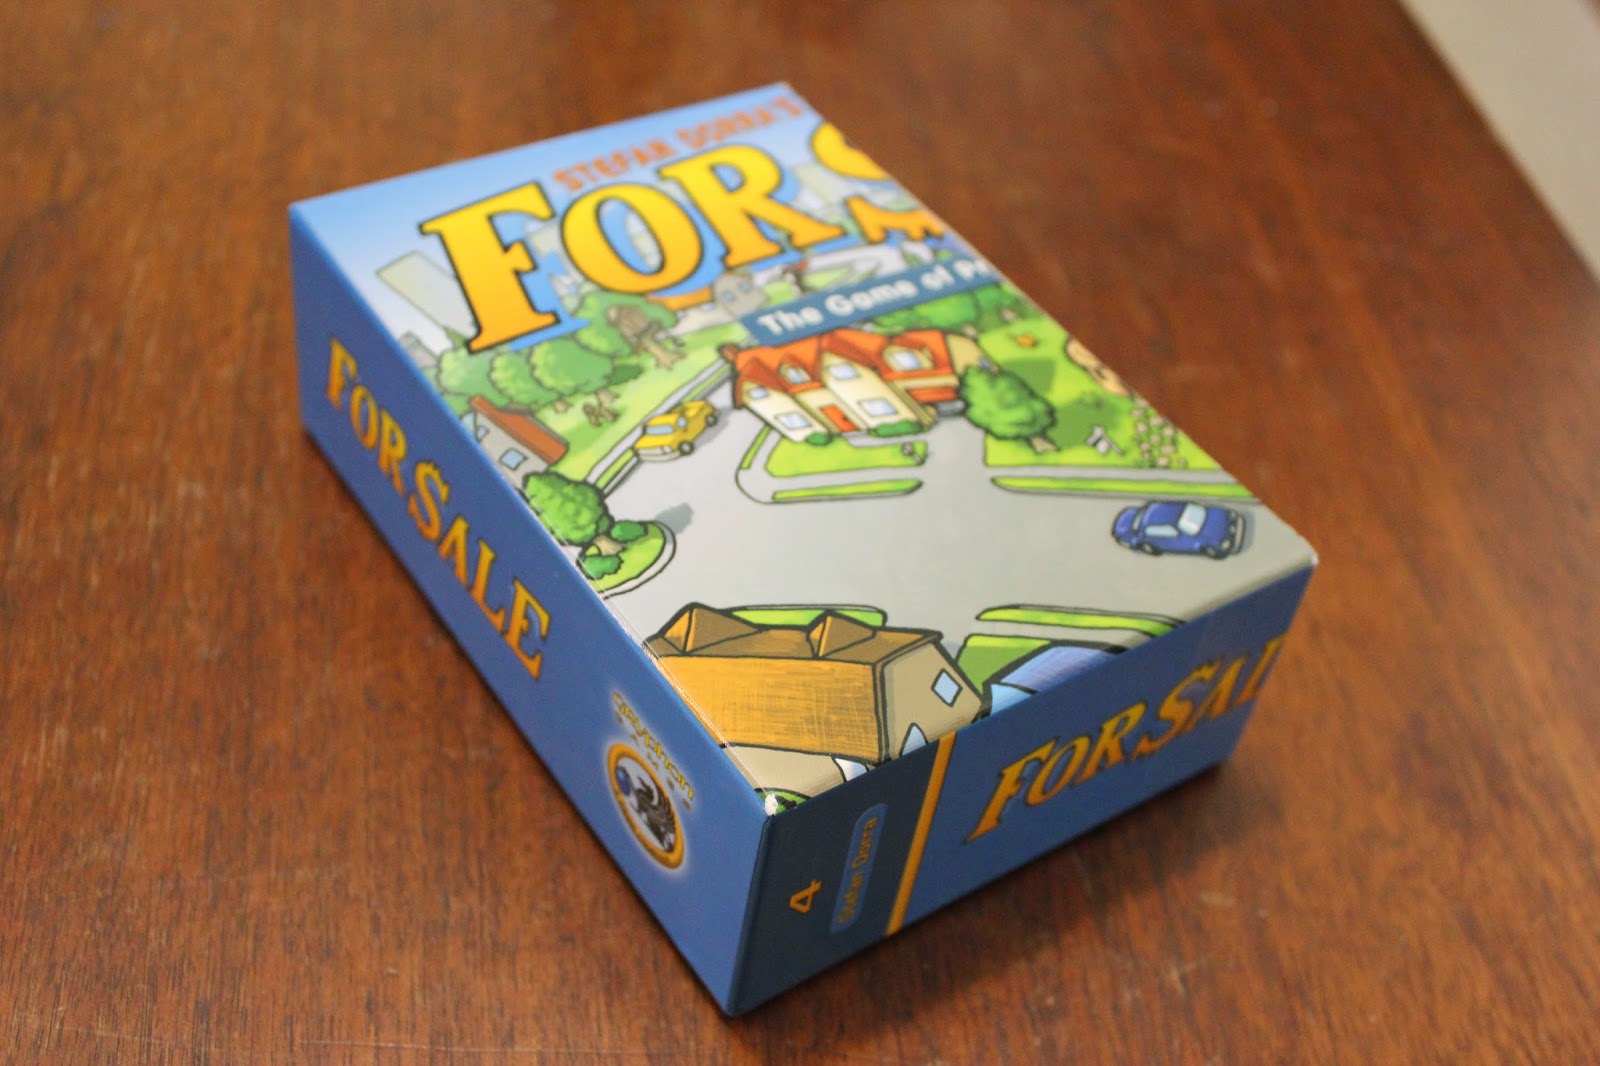 Download Daniel Solis: Why are board game boxes so big?